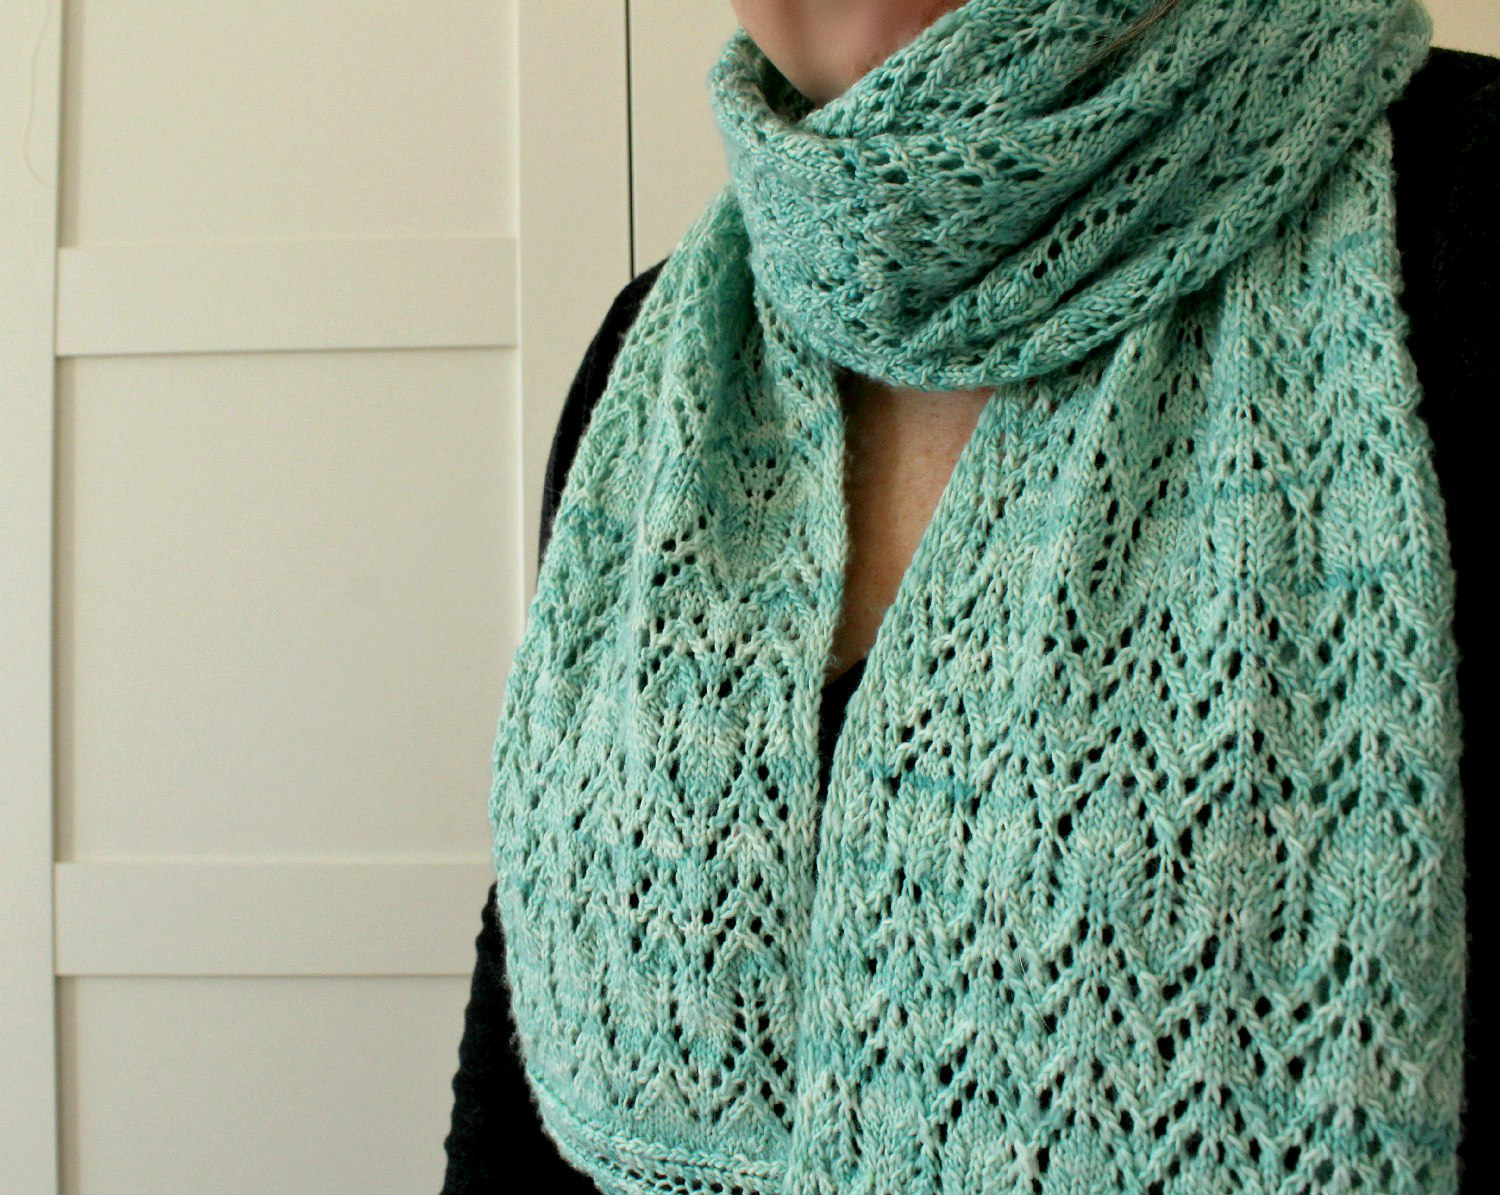 lace scarf knitting pattern Cathedral Bells scarf pattern by Lilia Vanini Liliacraftparty